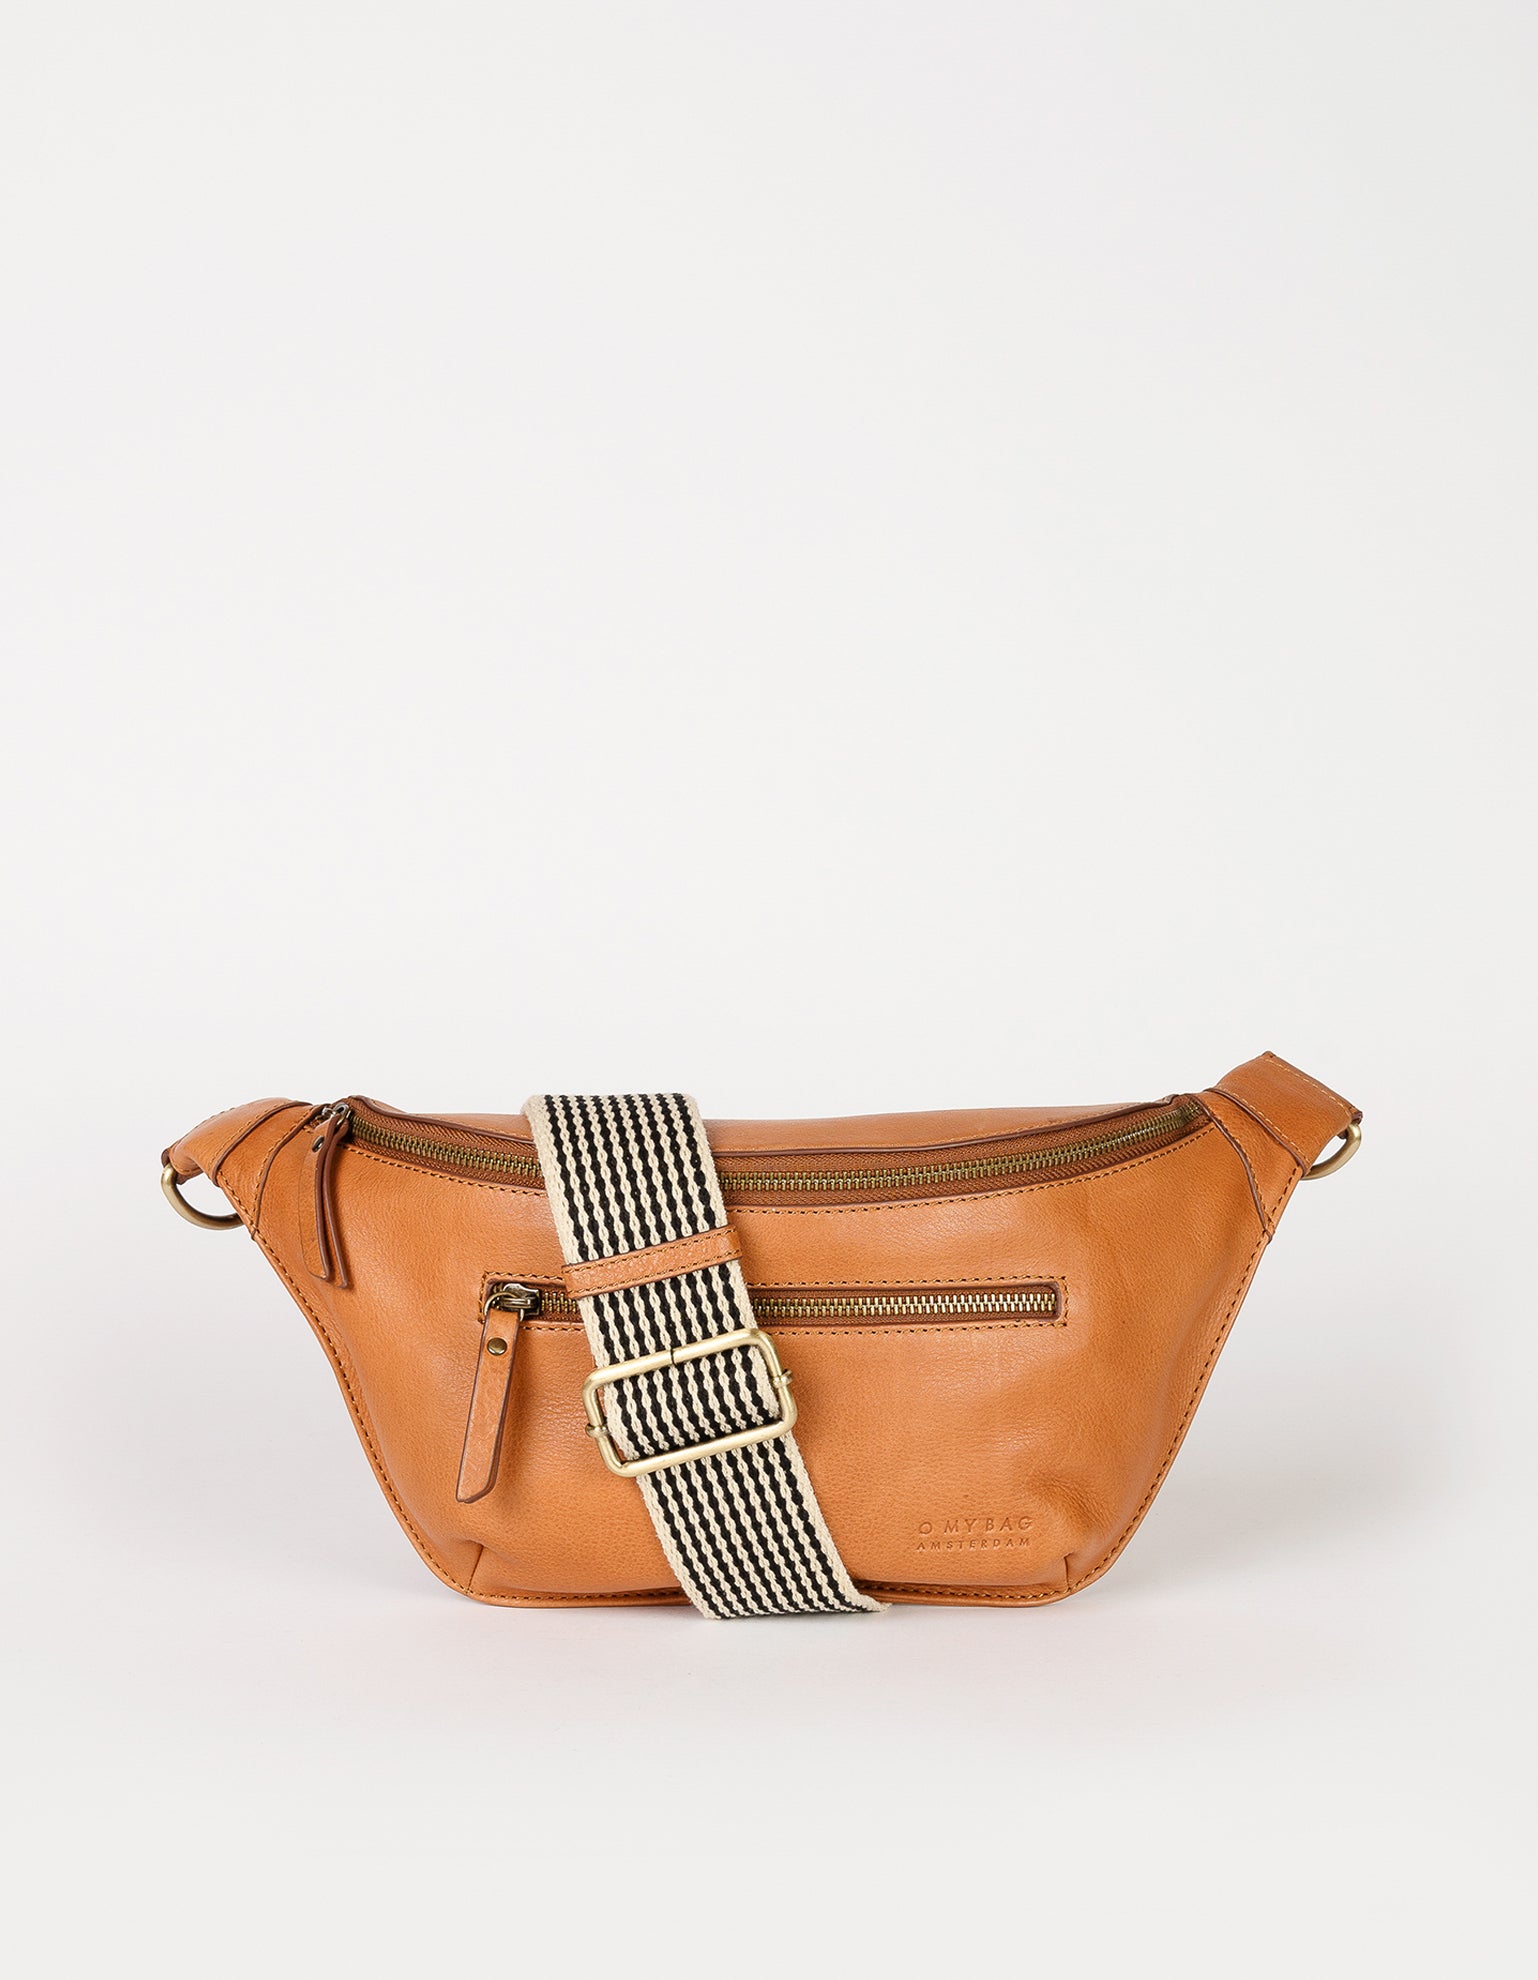 Drew Bum Bag in Wild Oak soft grain leather with checkered strap. Front product image.